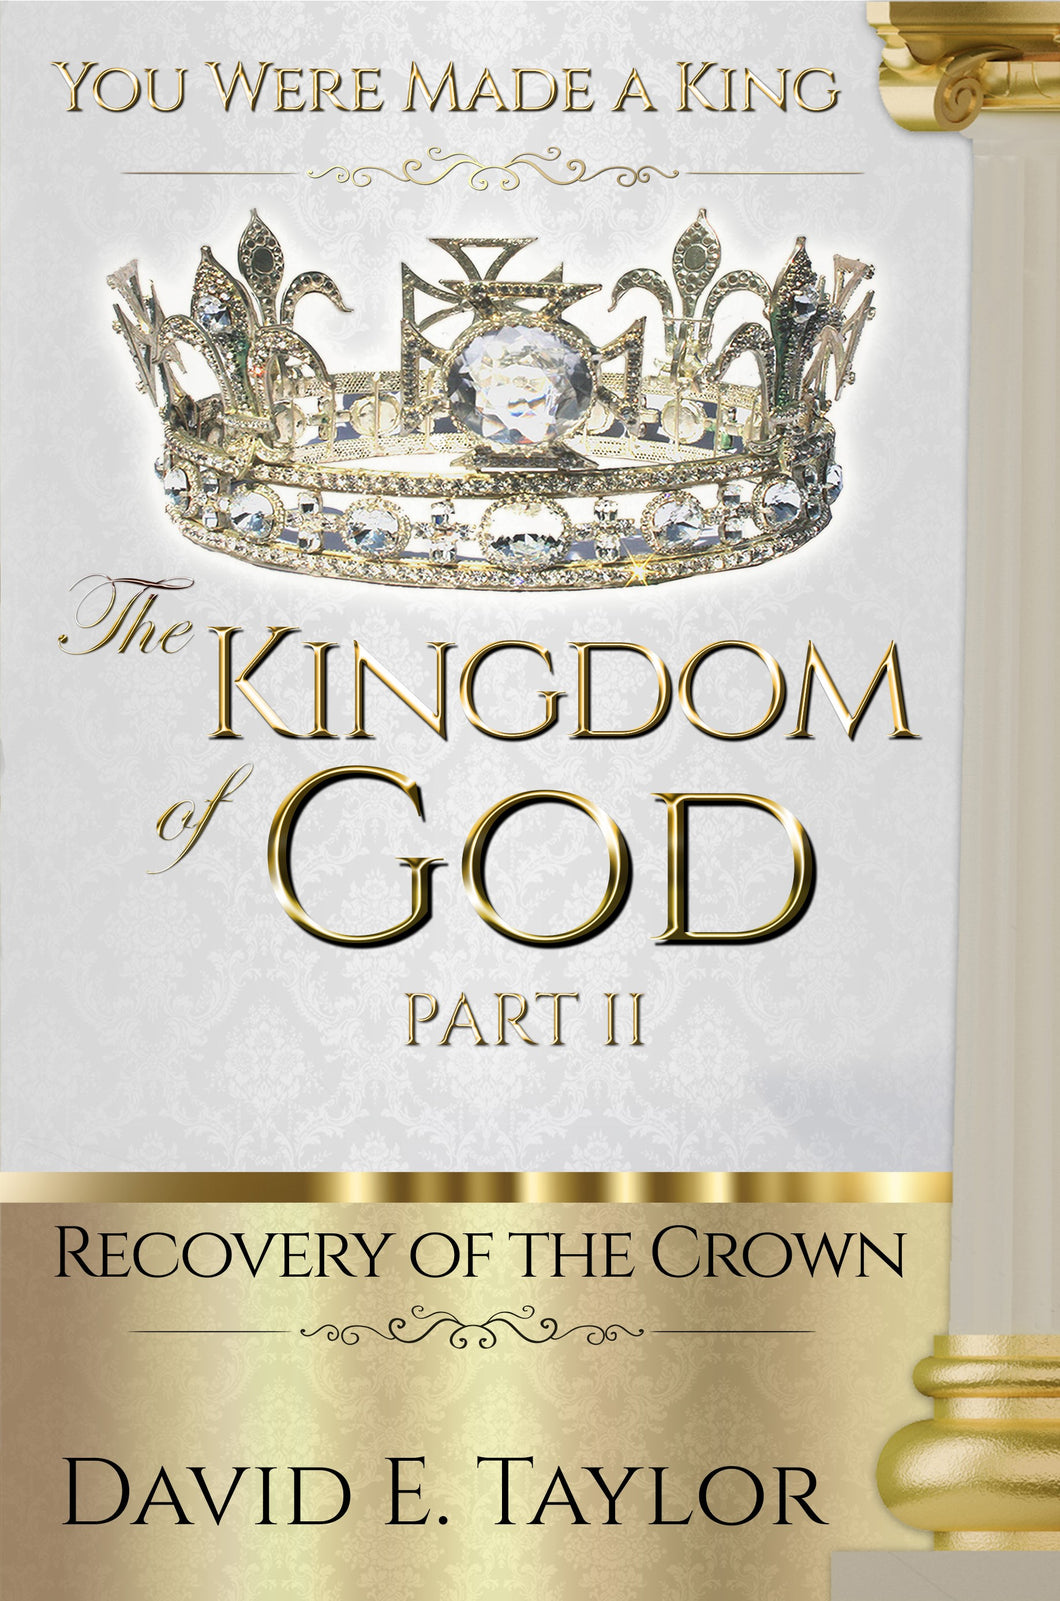 The Kingdom of God Series Vol. 1 Part 2: Recovery of the Crown E-Book